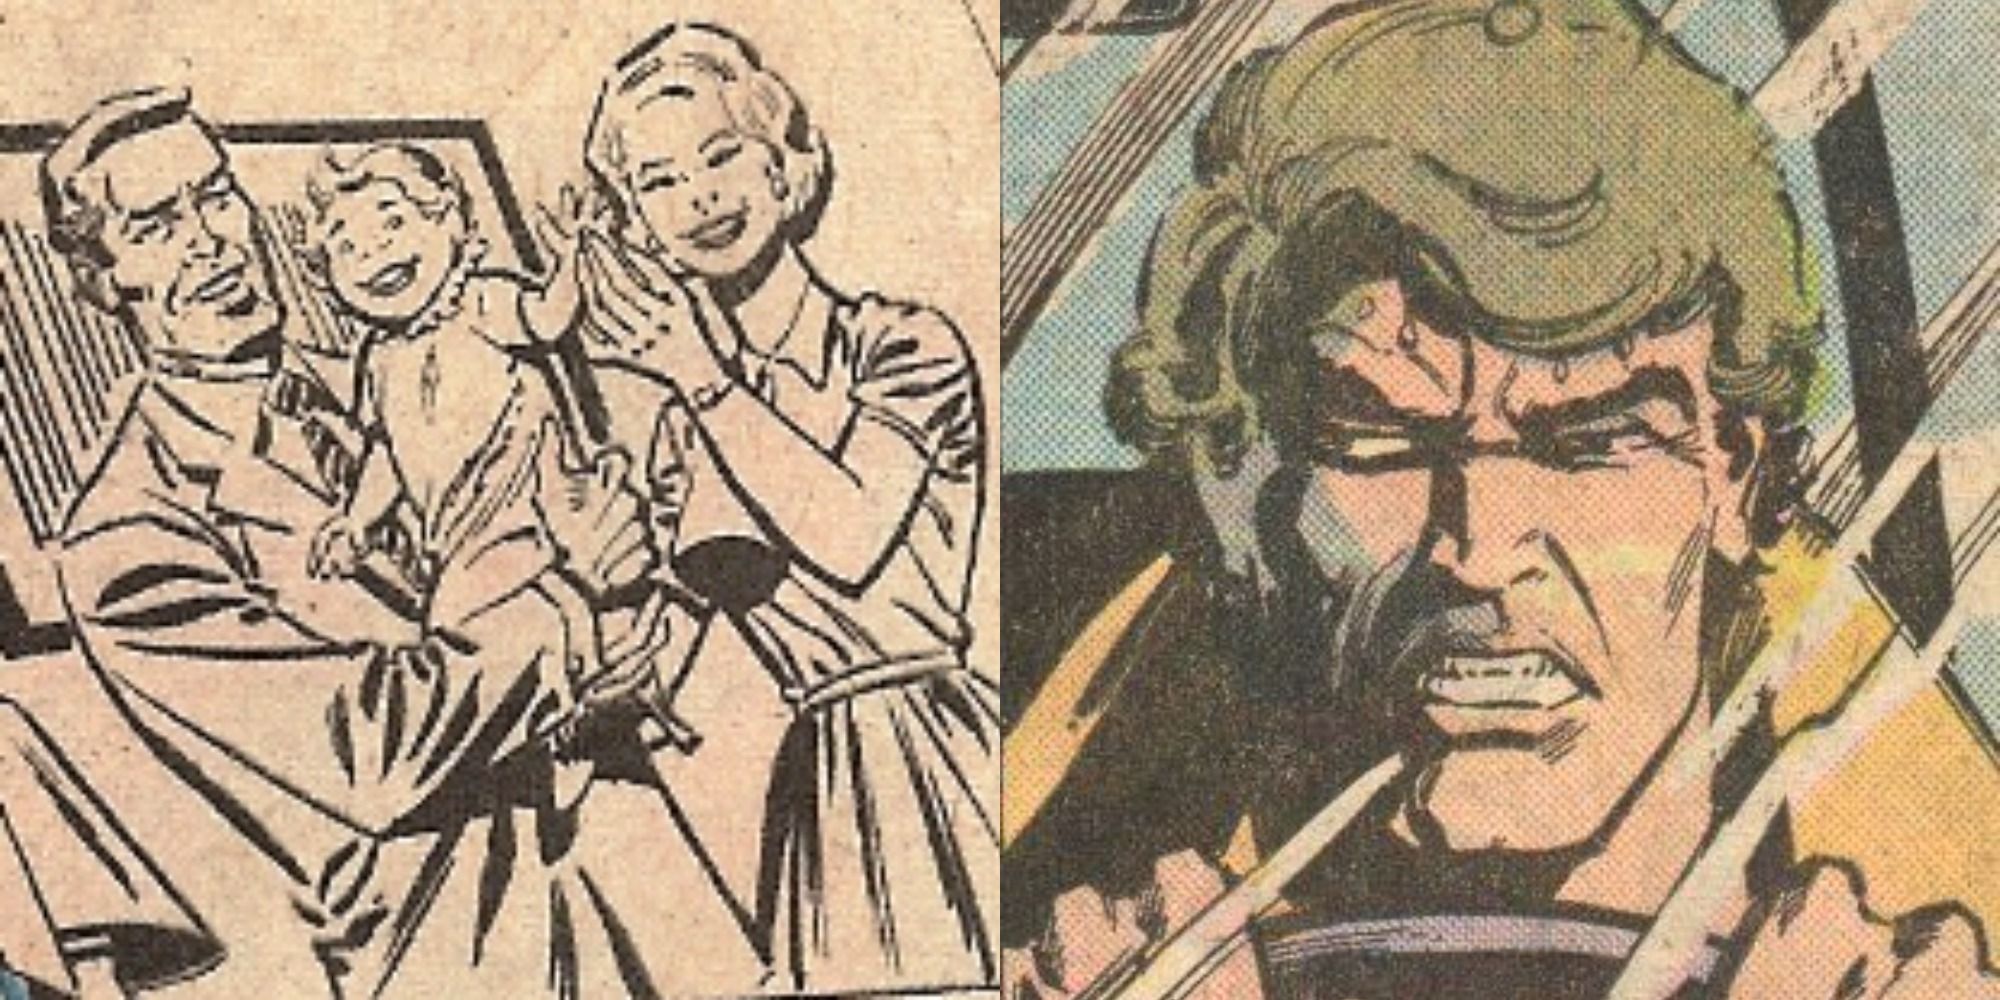 Split image depicting the Norriss family, and Jackson Norriss angry